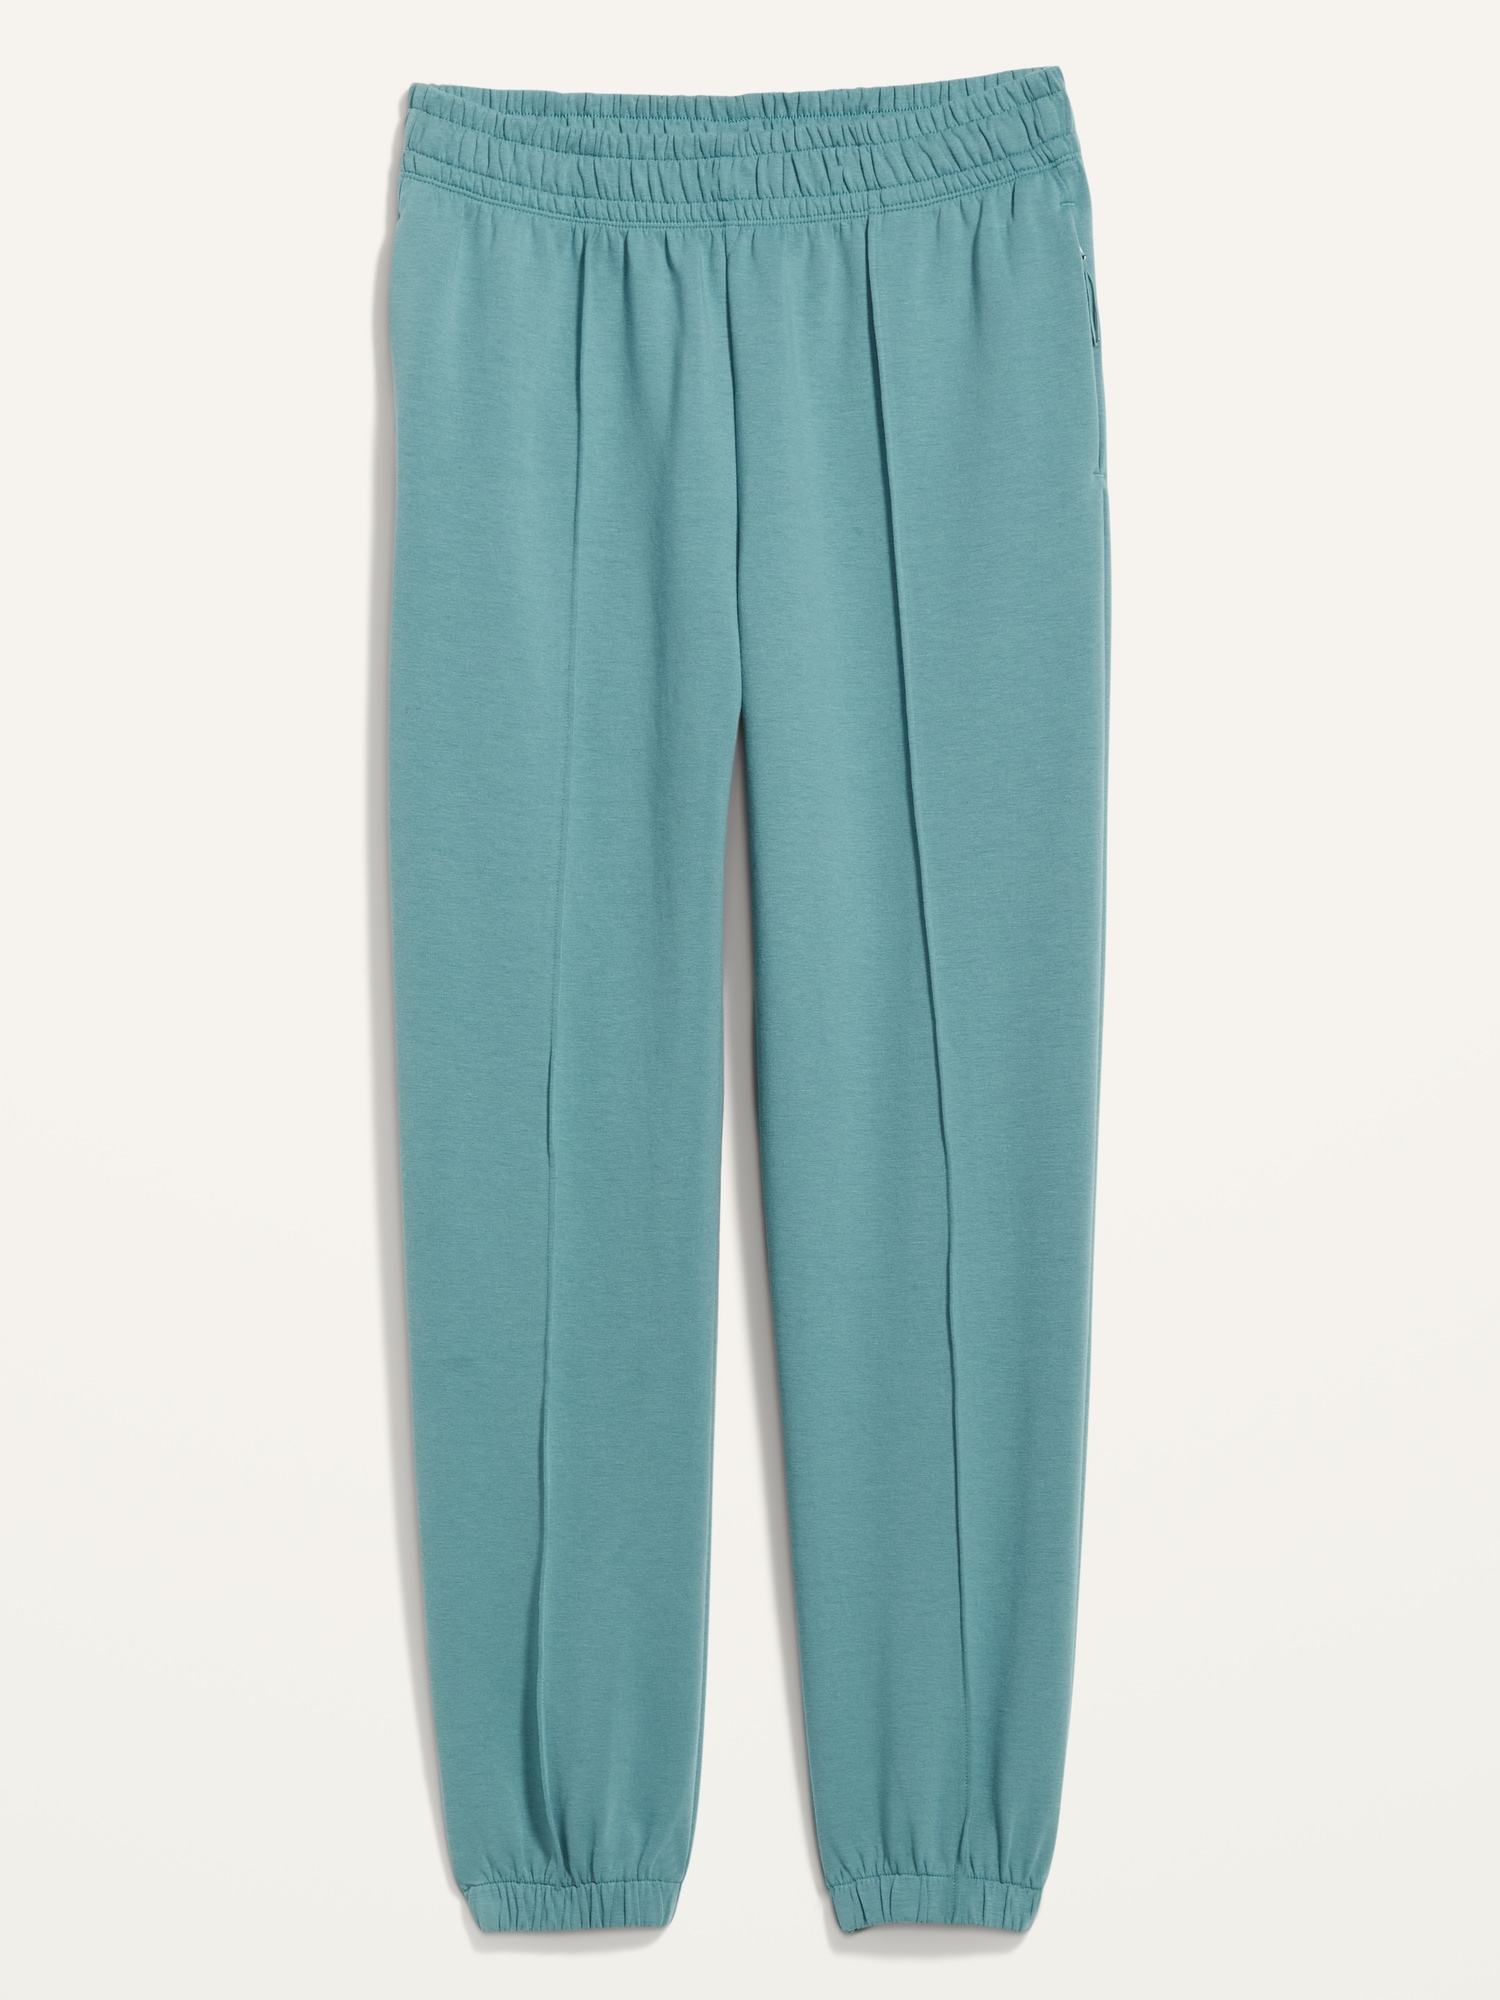 Old Navy High-Waisted Dynamic Fleece Pintucked Sweatpants for Women –  Search By Inseam